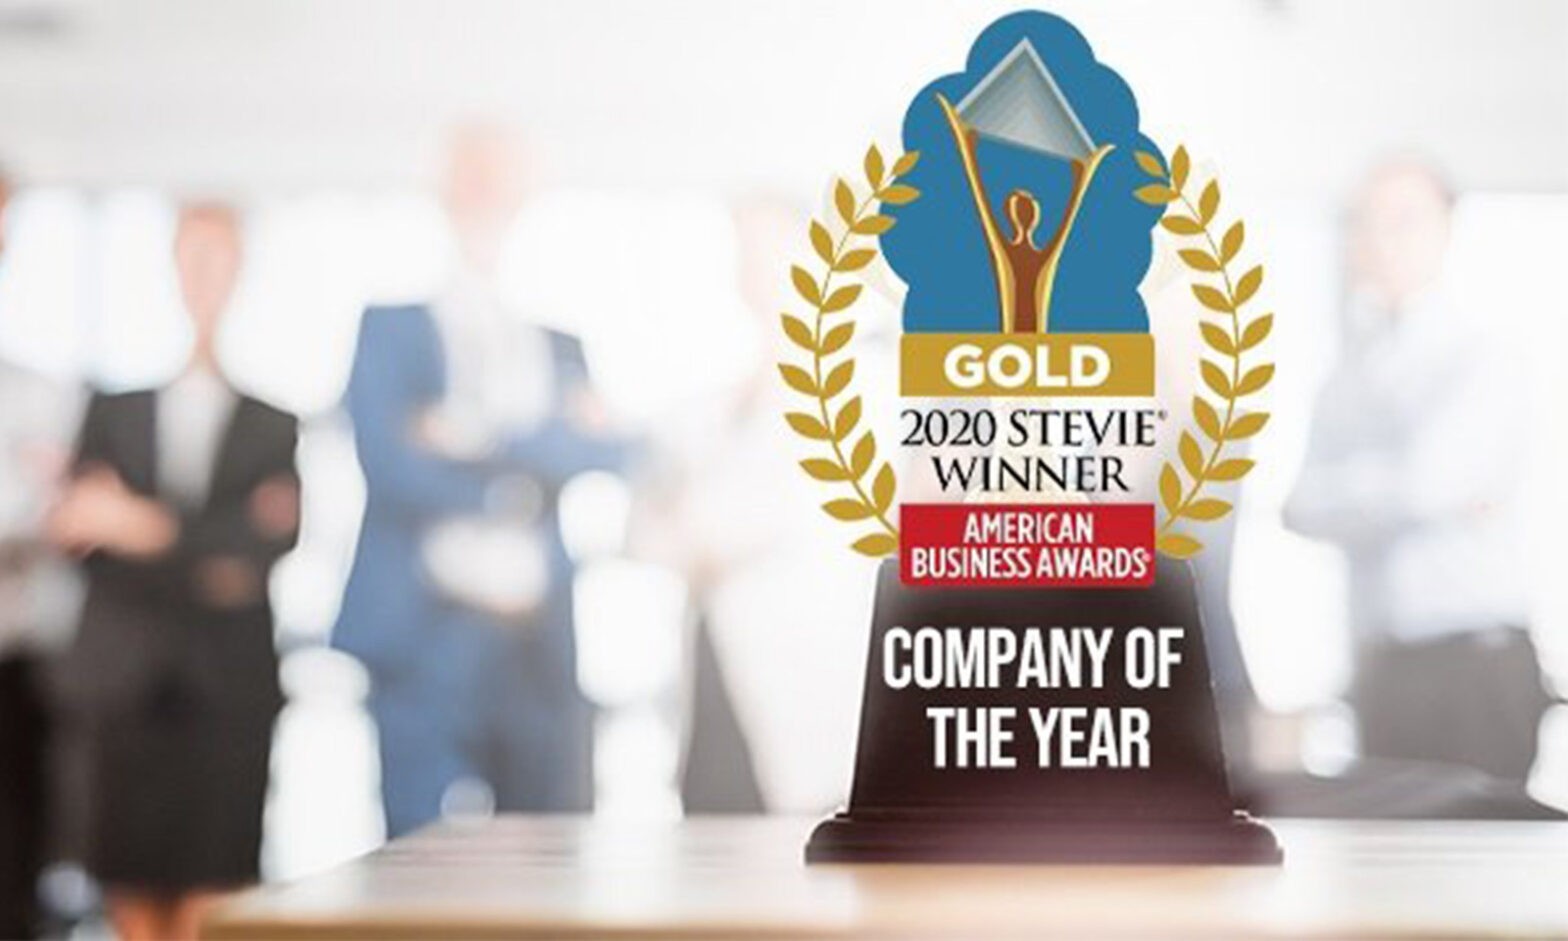 VDS TAKES HOME THE GOLD IN THE AMERICAN BUSINESS AWARDS